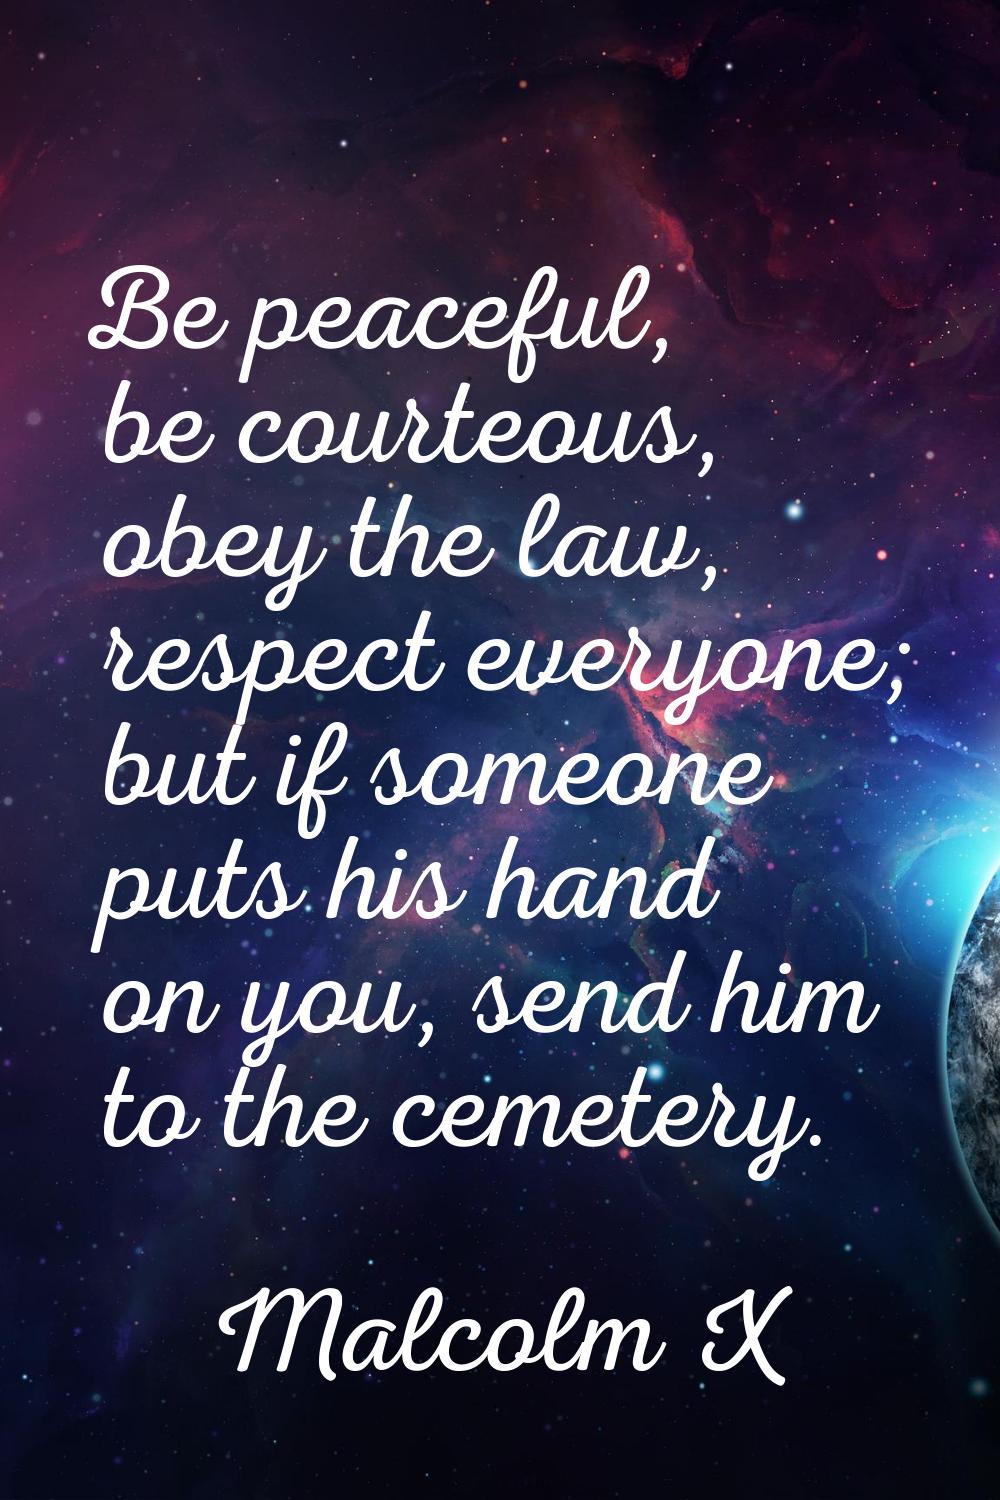 Be peaceful, be courteous, obey the law, respect everyone; but if someone puts his hand on you, sen